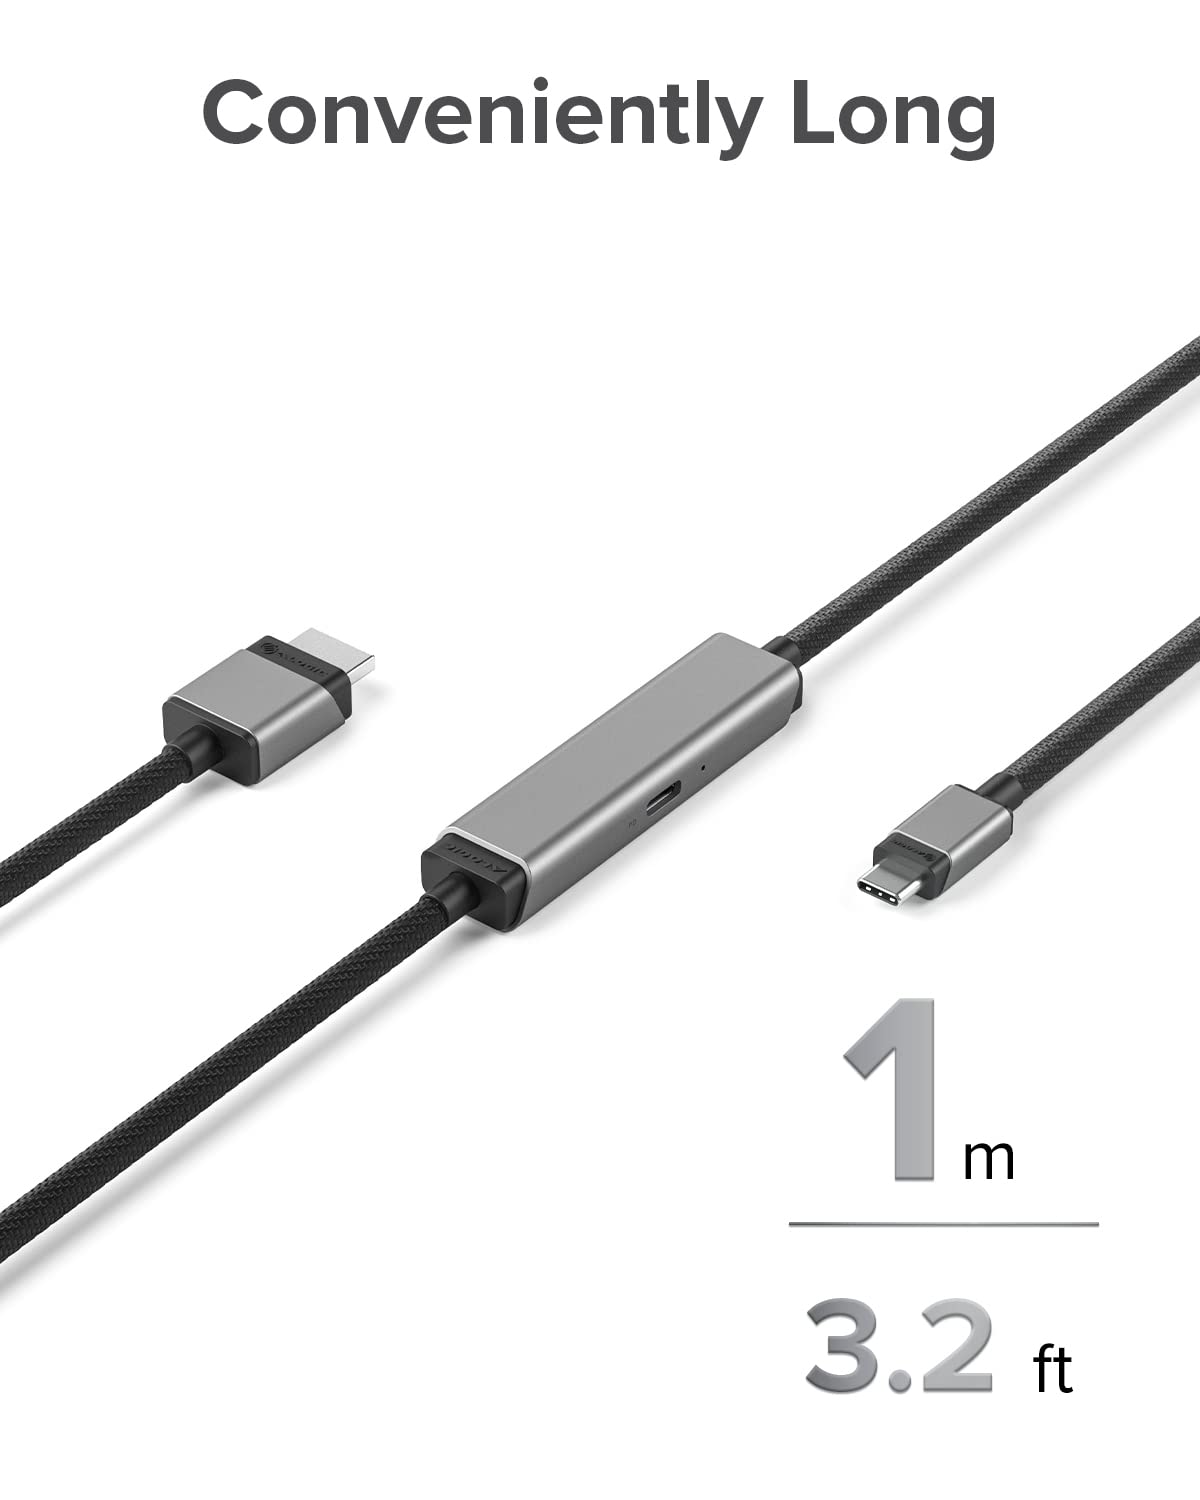 ALOGIC Ultra USB-C to HDMI Cable, 4K External Display, 100W Power Delivery, Premium Quality, Nylon Braided Cable with Metal housing, Compatible with Windows, Mac, and Chromebook. 1.0 Meters - Dealtargets.com